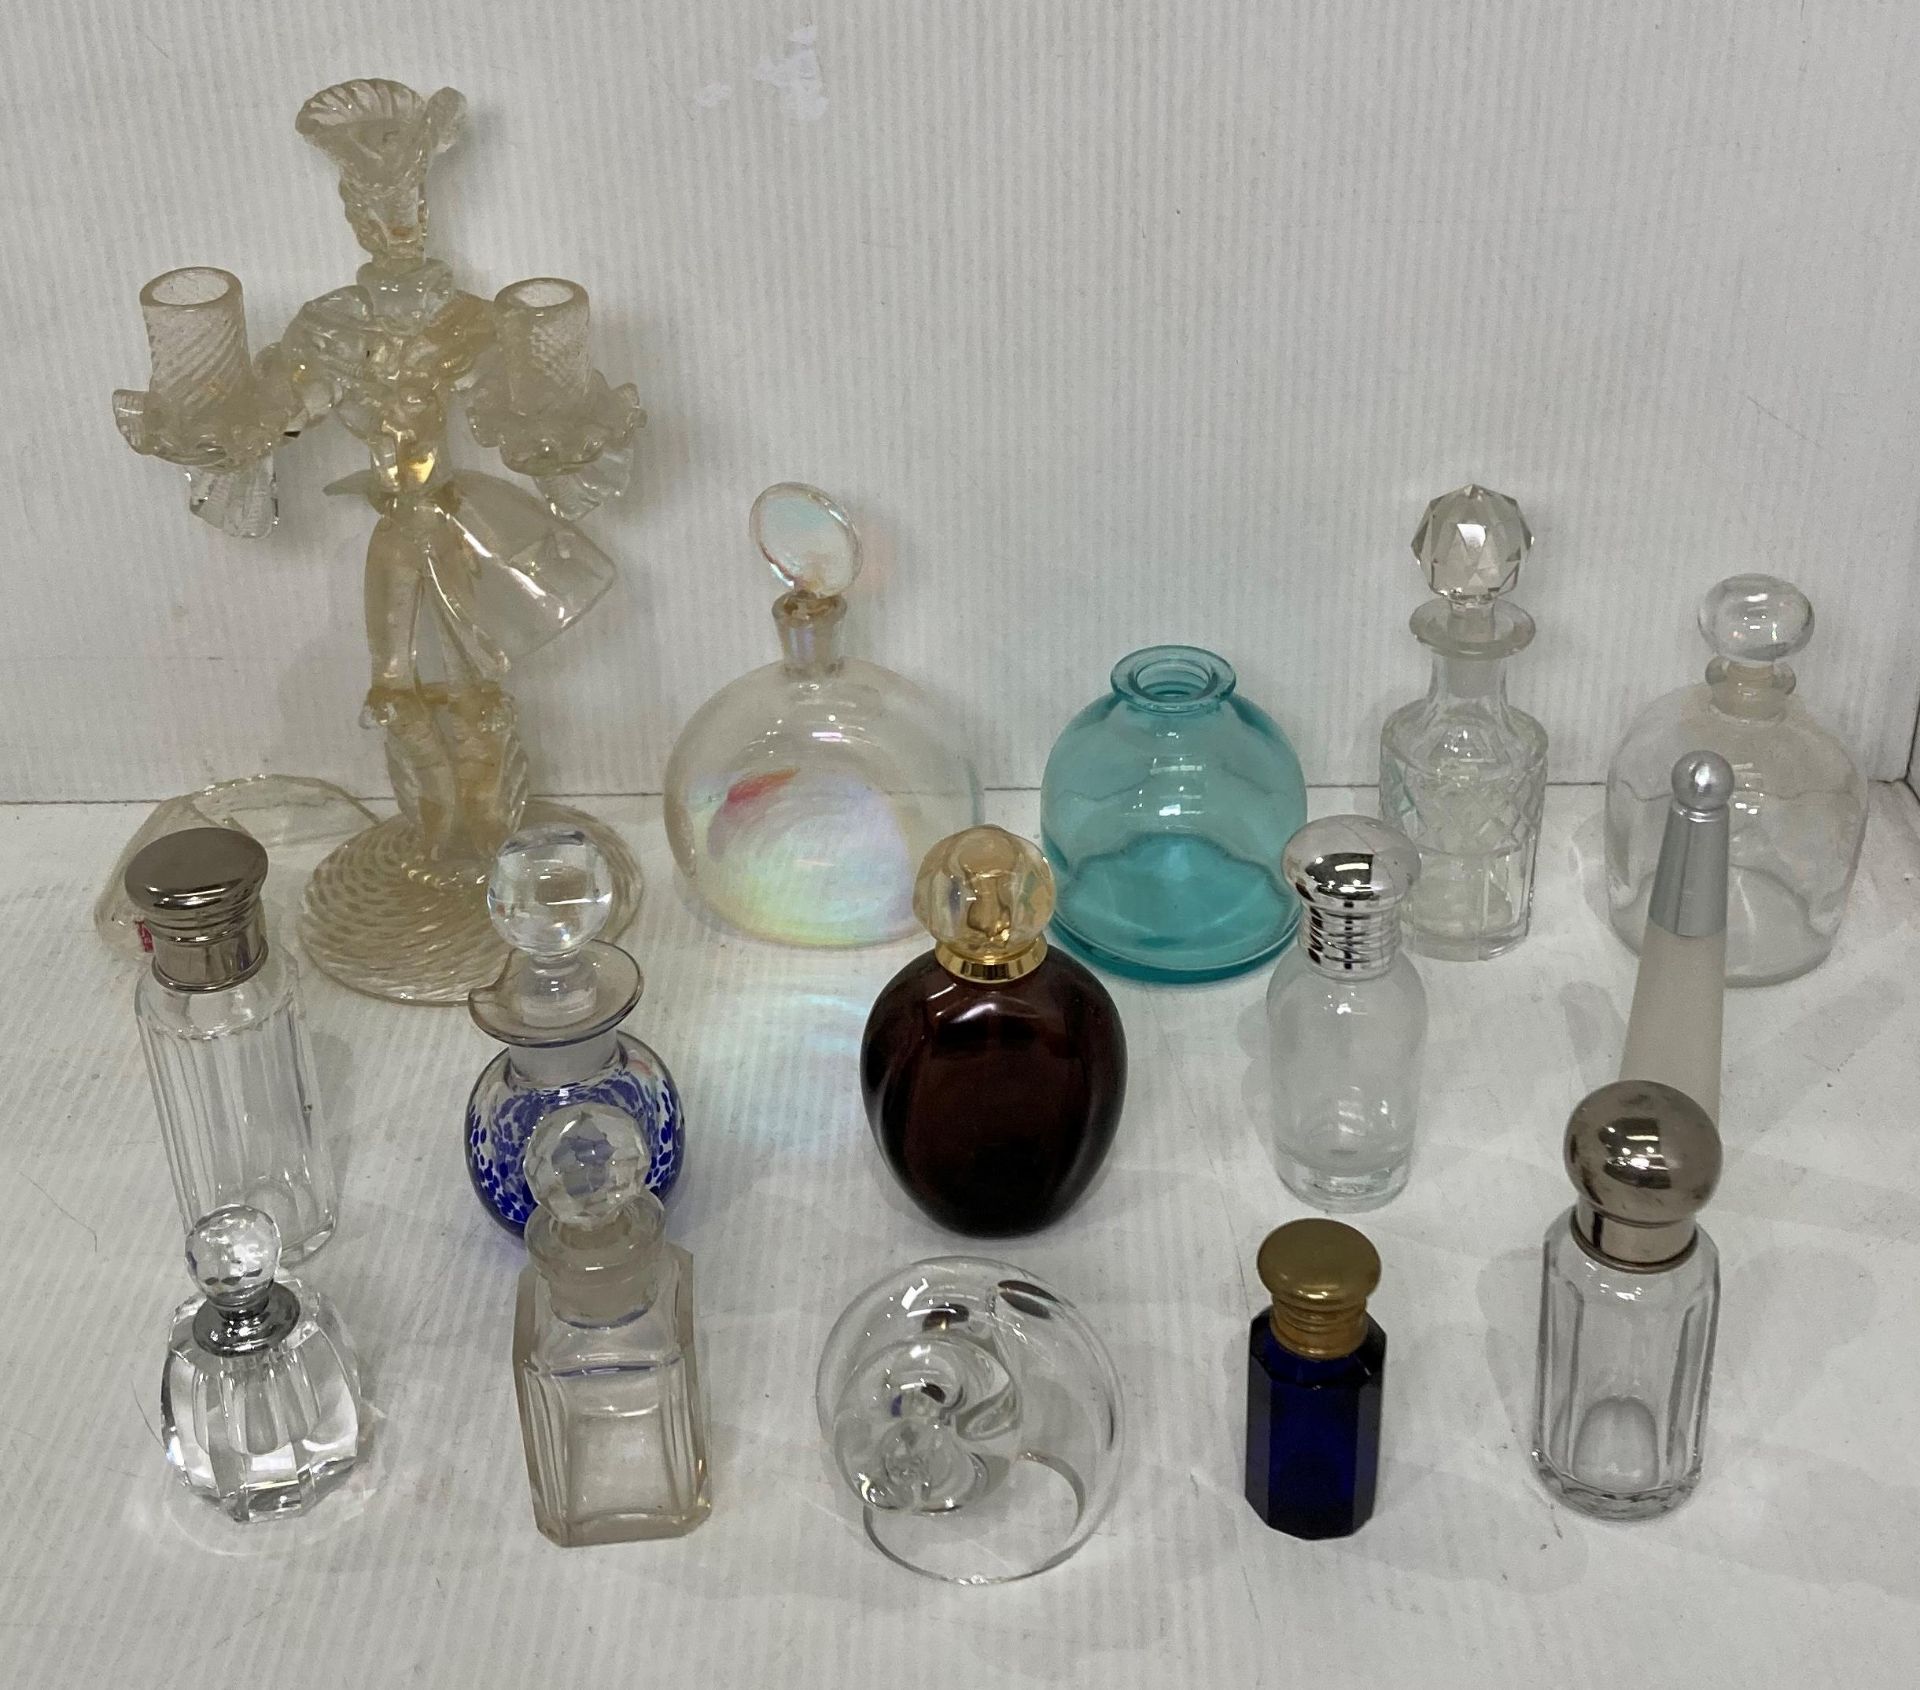 Thirteen assorted perfume bottles including vintage and modern pieces and a blown glass candelabra